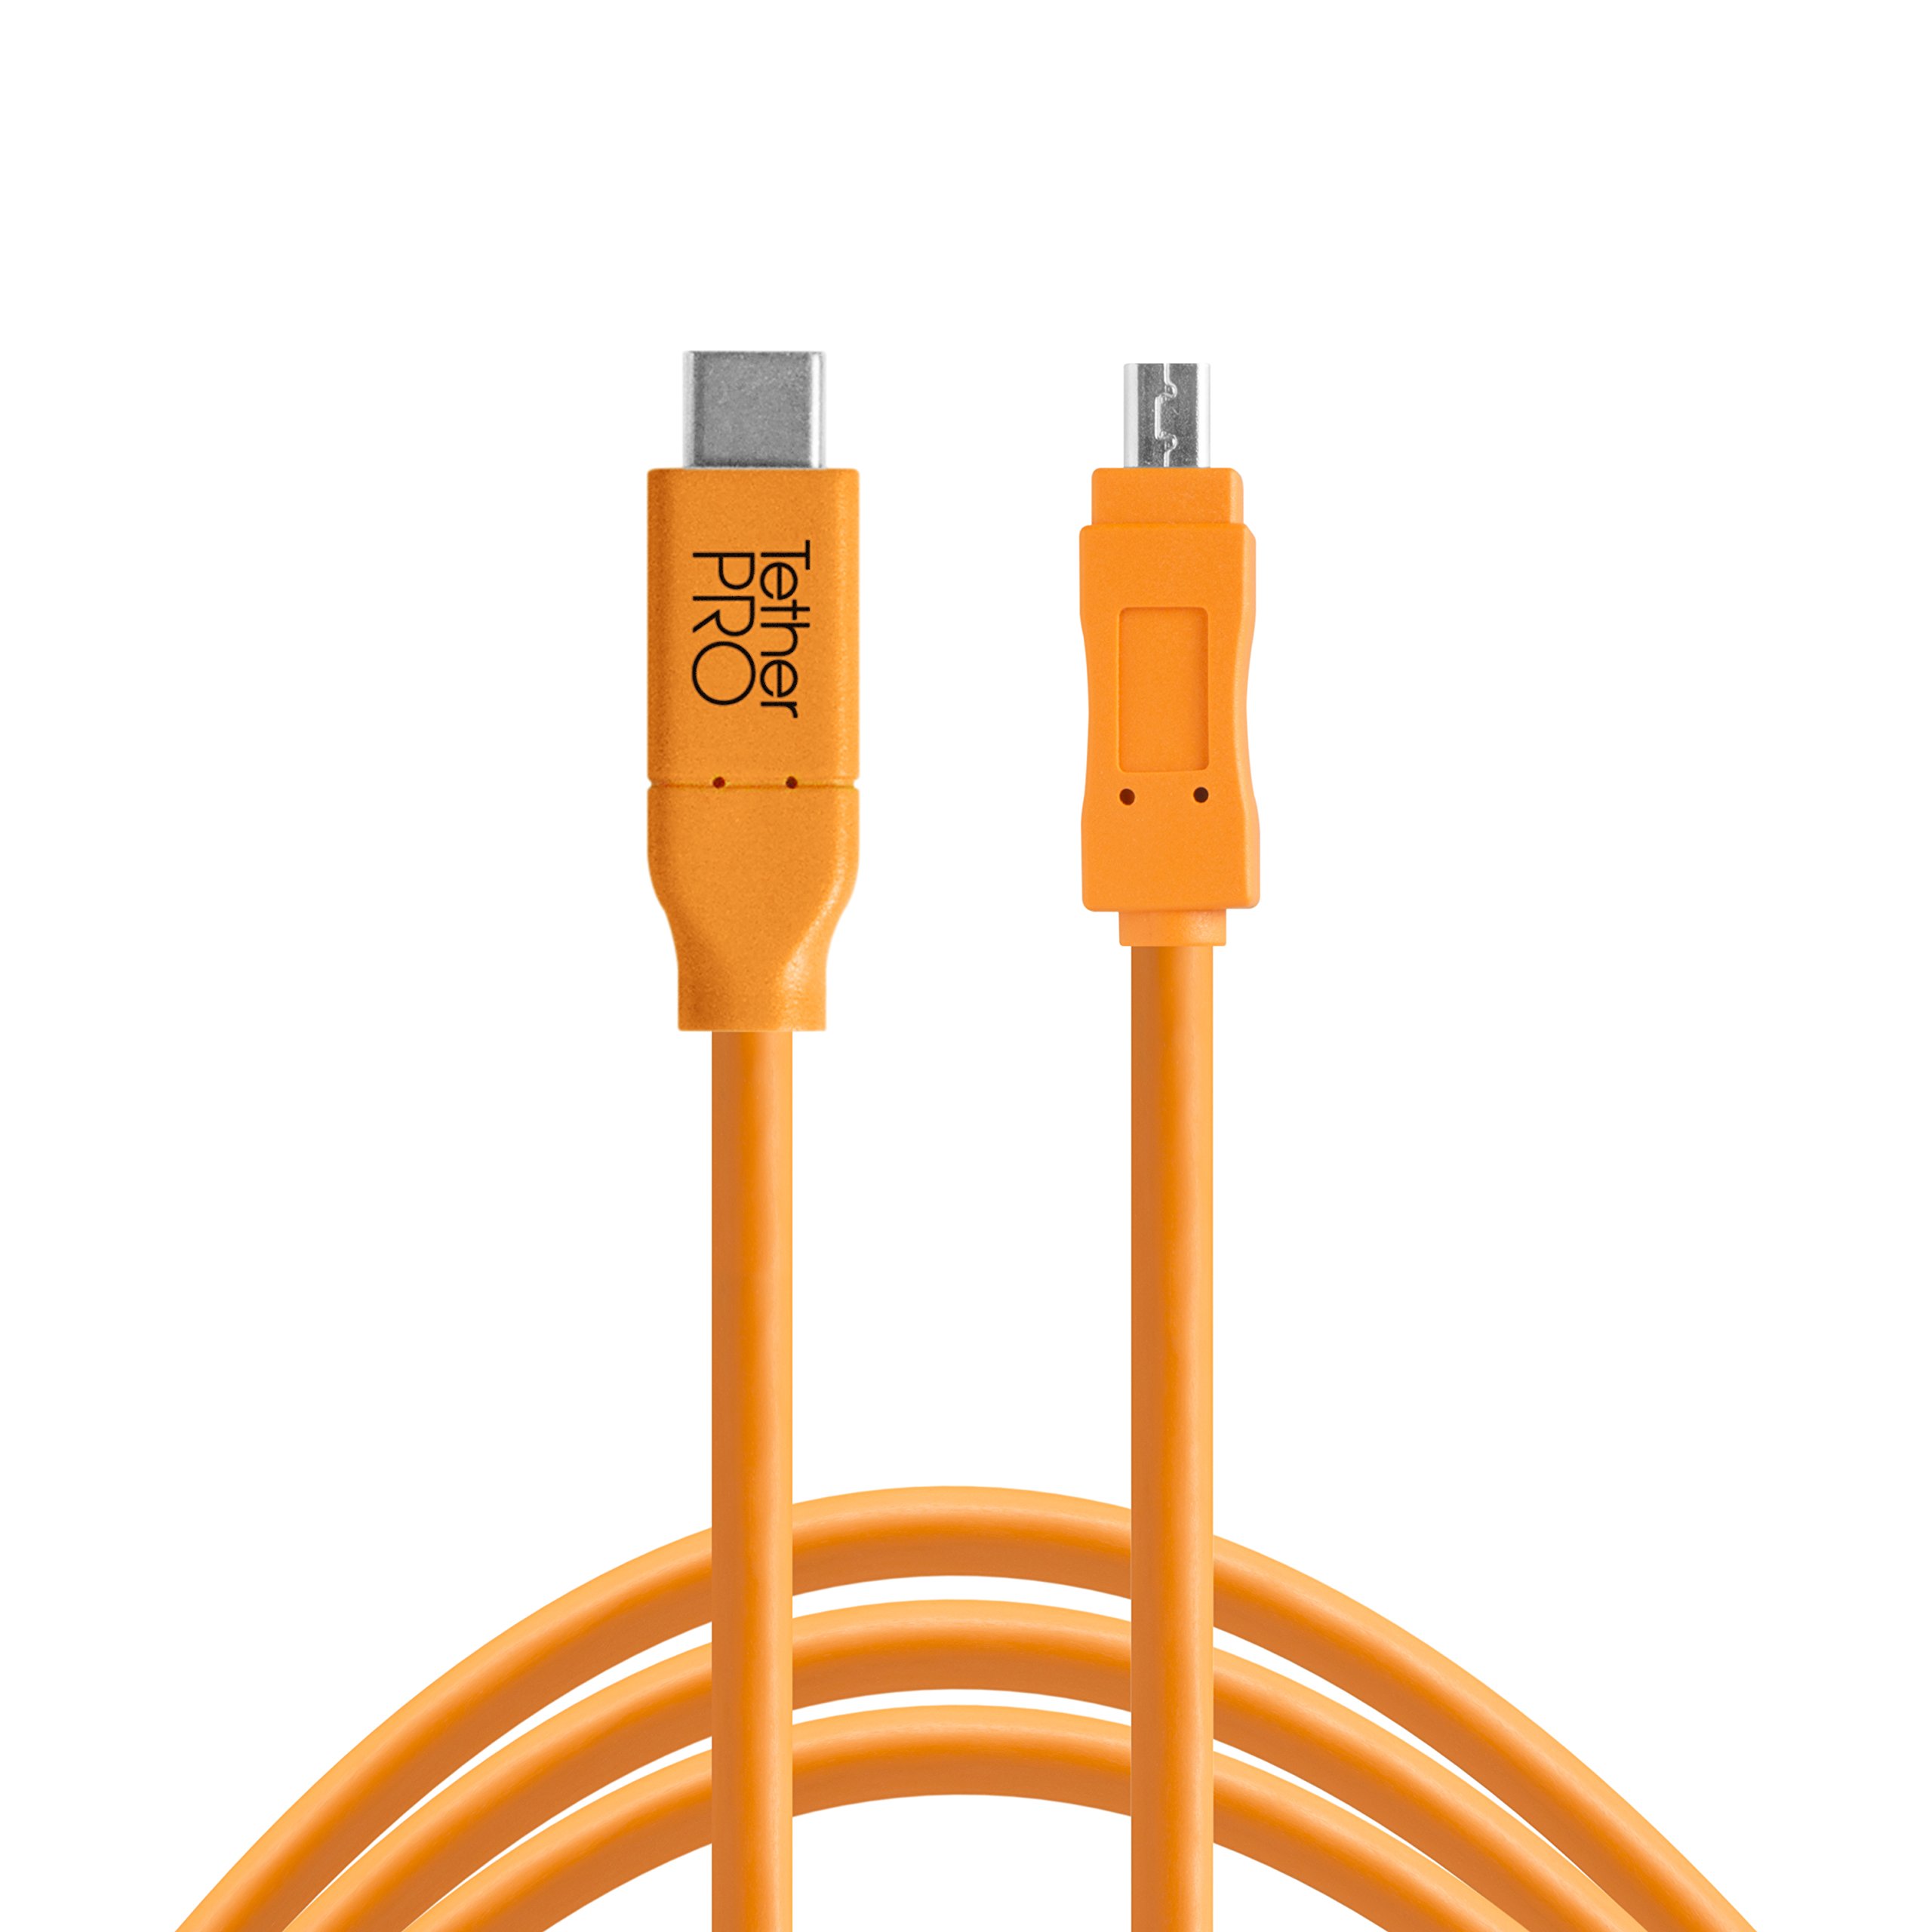 Image showing a USB cable connected to a computer